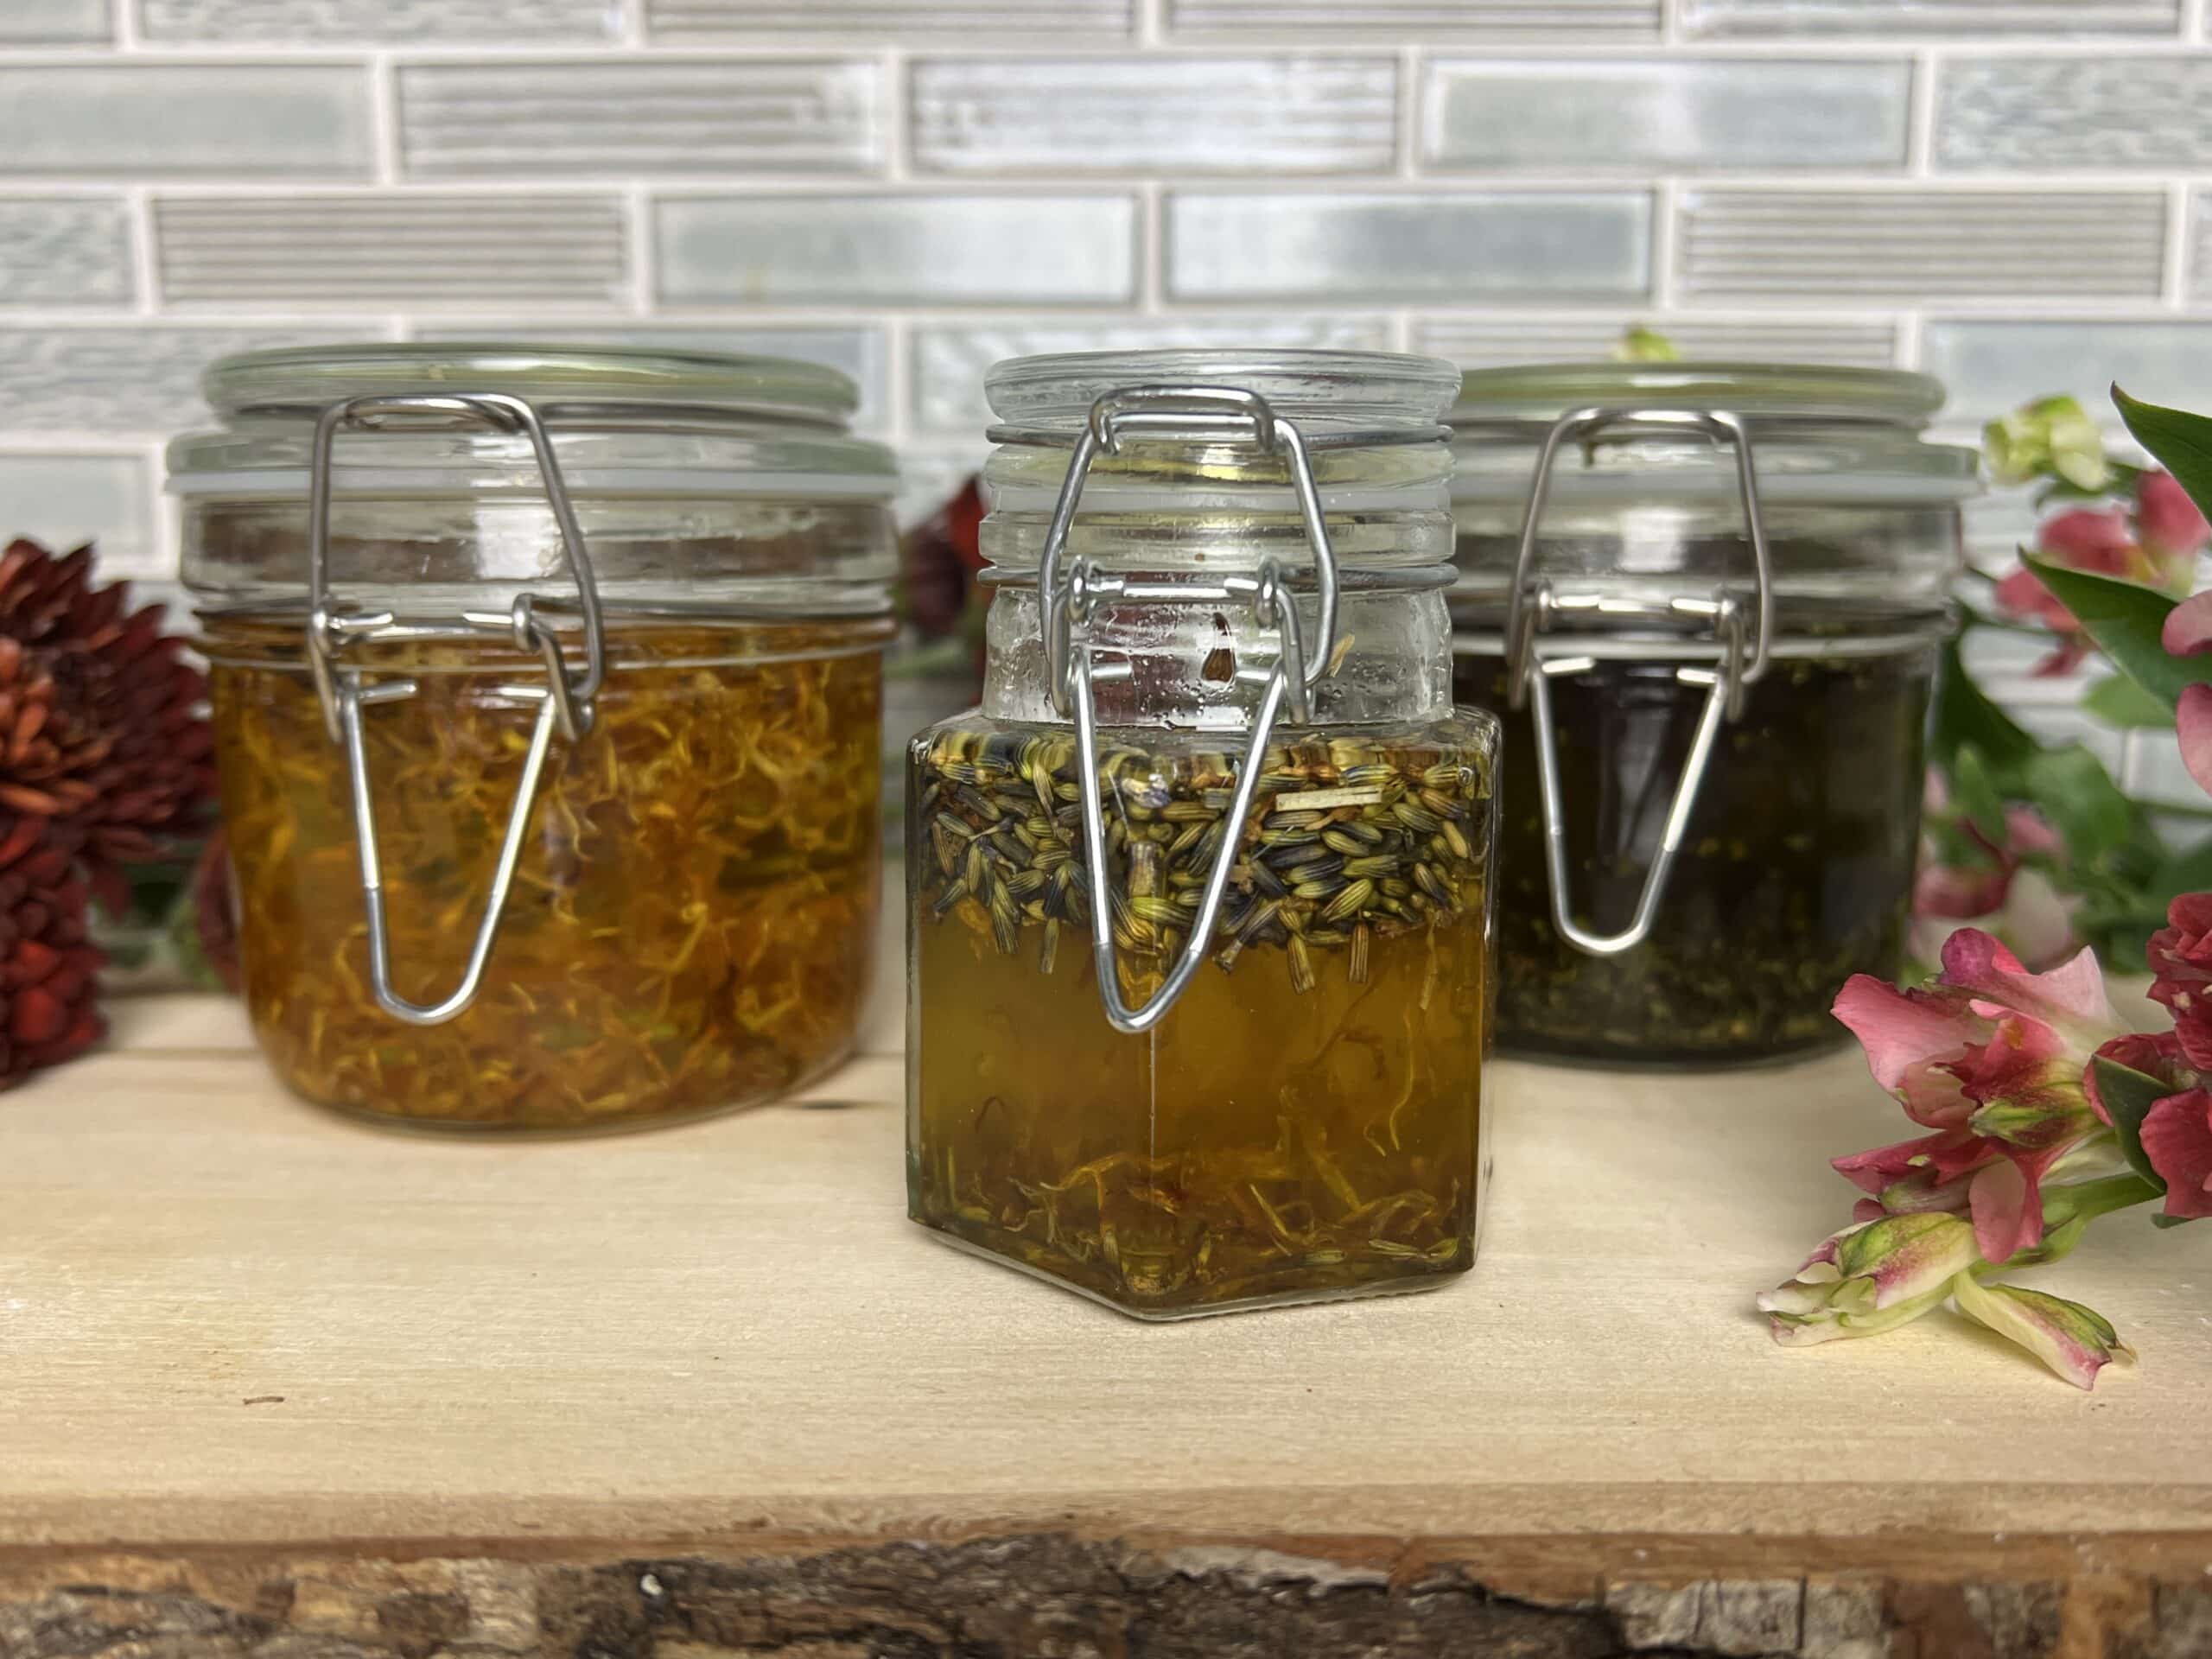 How to Make Herb and Flower Infused Oils